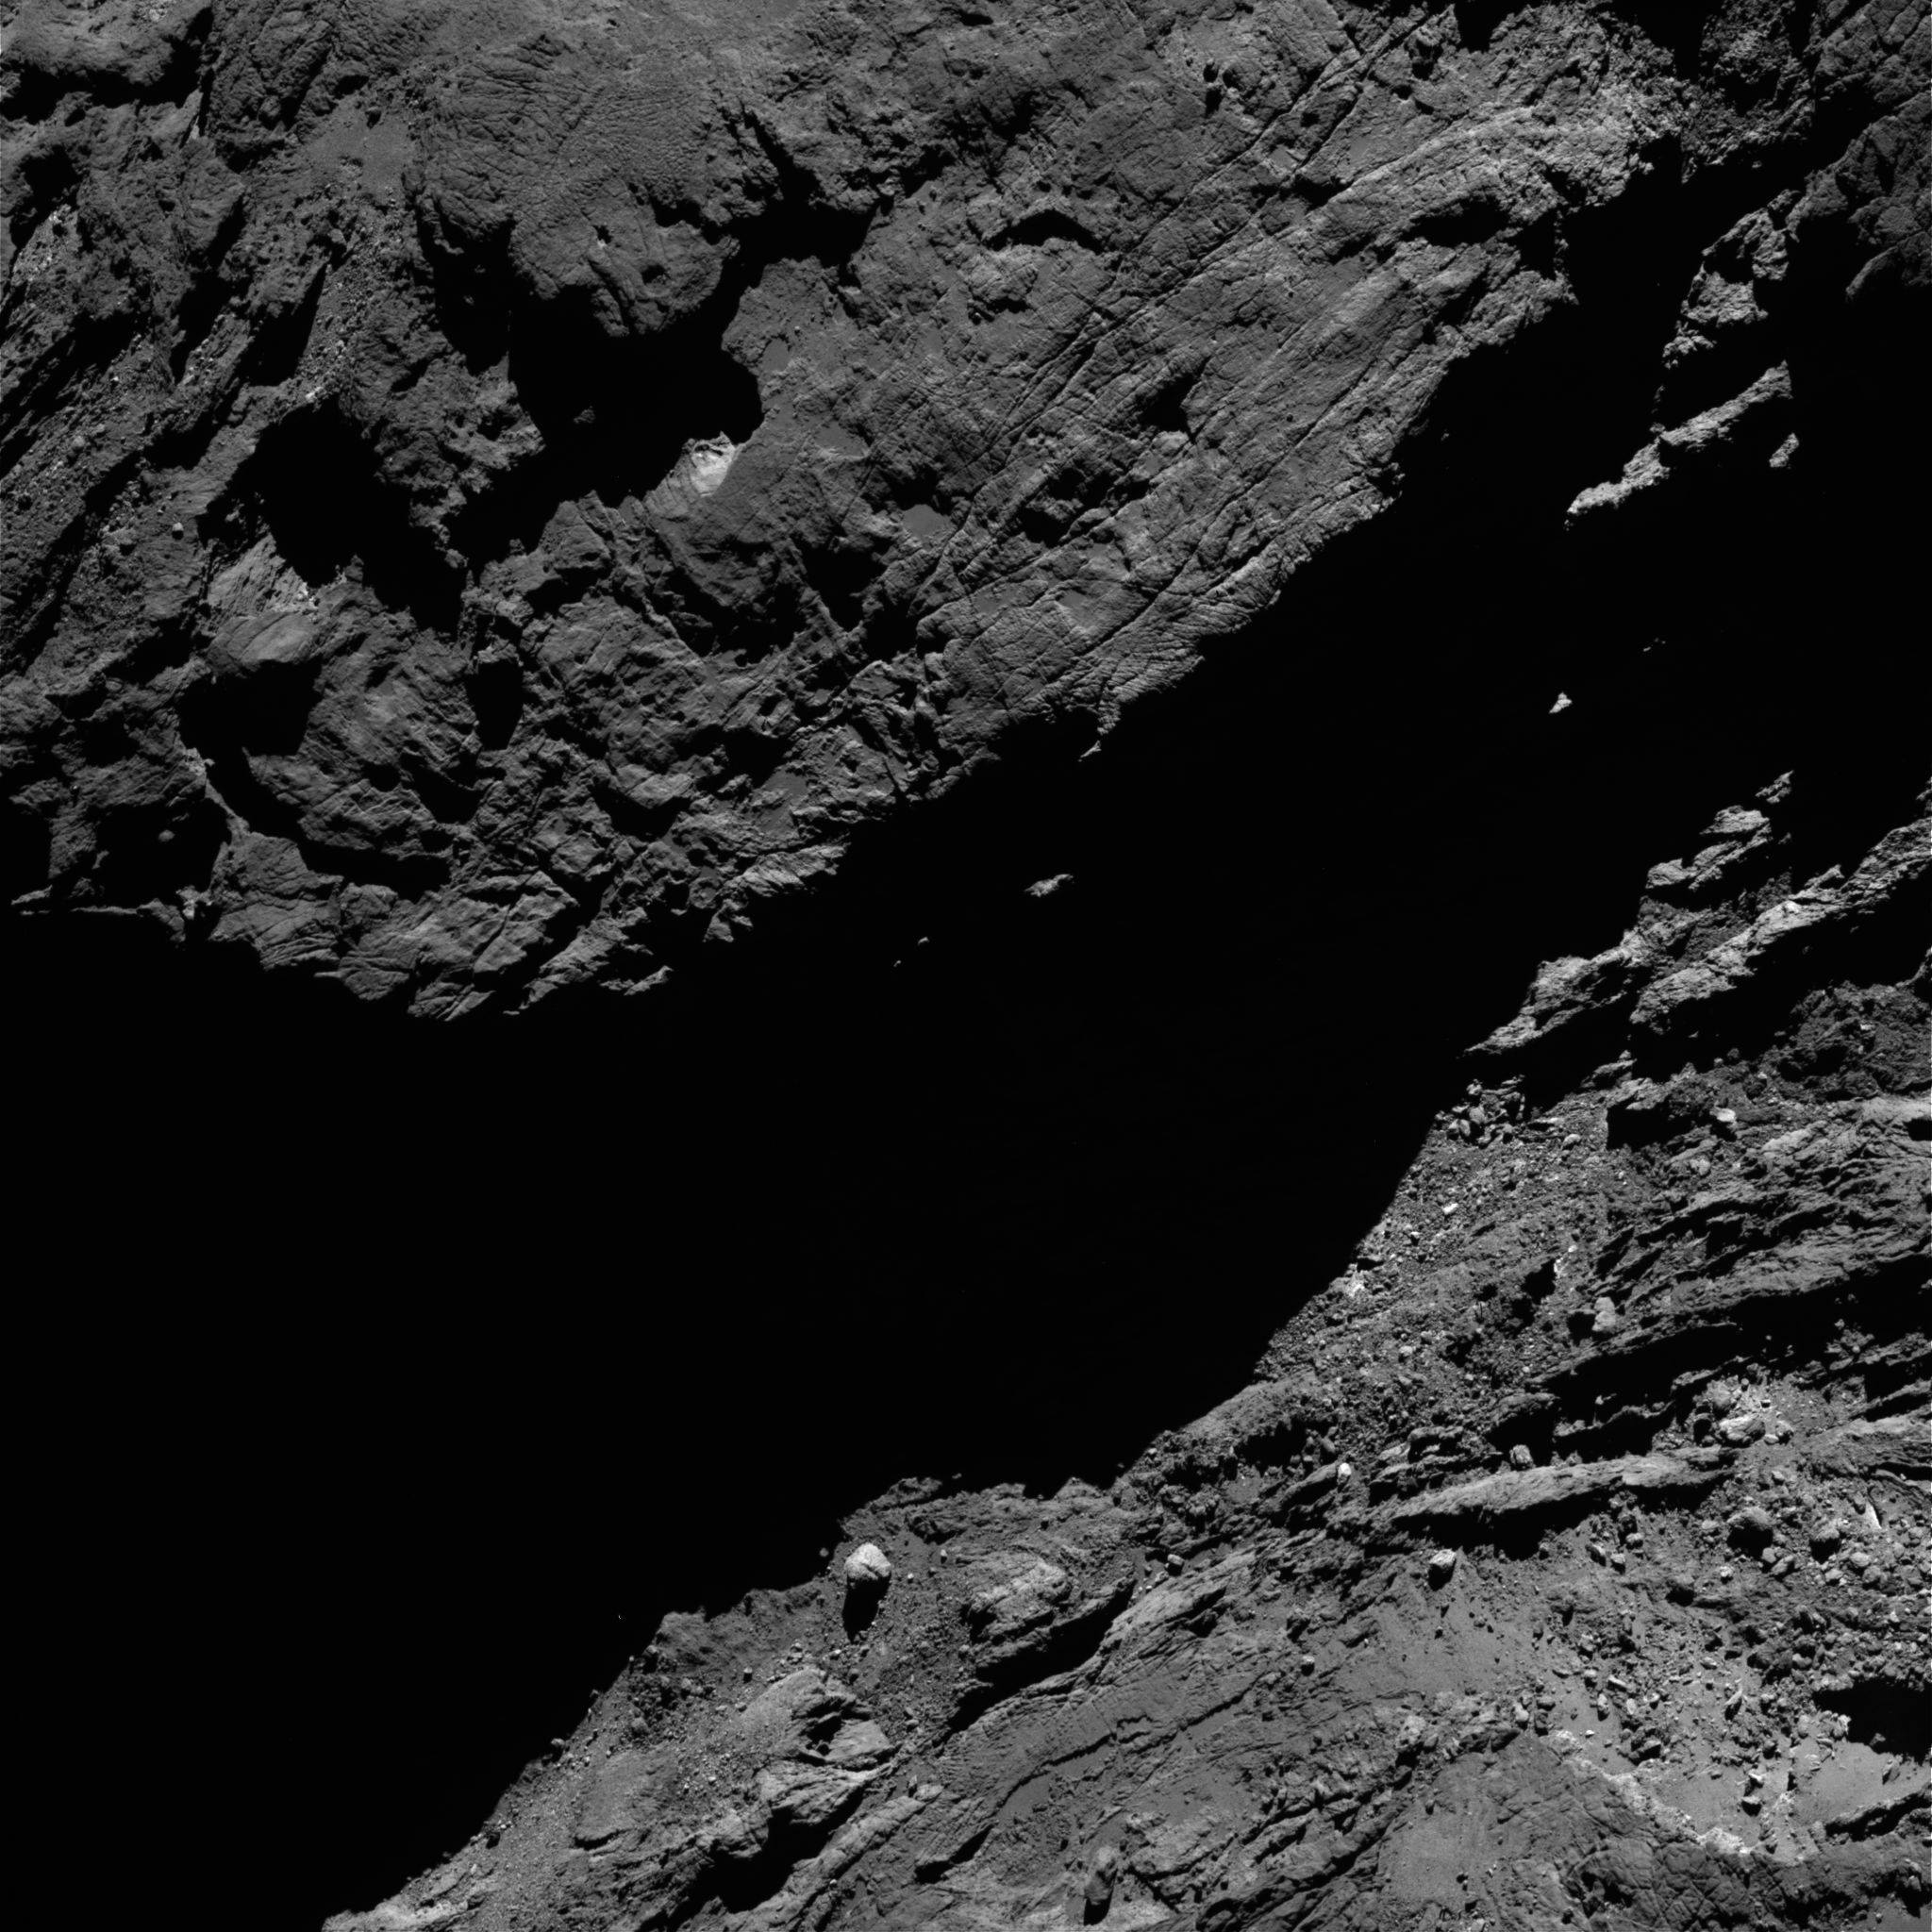 From ESA: "Closer still! This OSIRIS narrow-angle camera image was taken from a distance of 47.5 km on 7 February." Image Credit: ESA/Rosetta/MPS for OSIRIS Team MPS/UPD/LAM/IAA/SSO/INTA/UPM/DASP/IDA